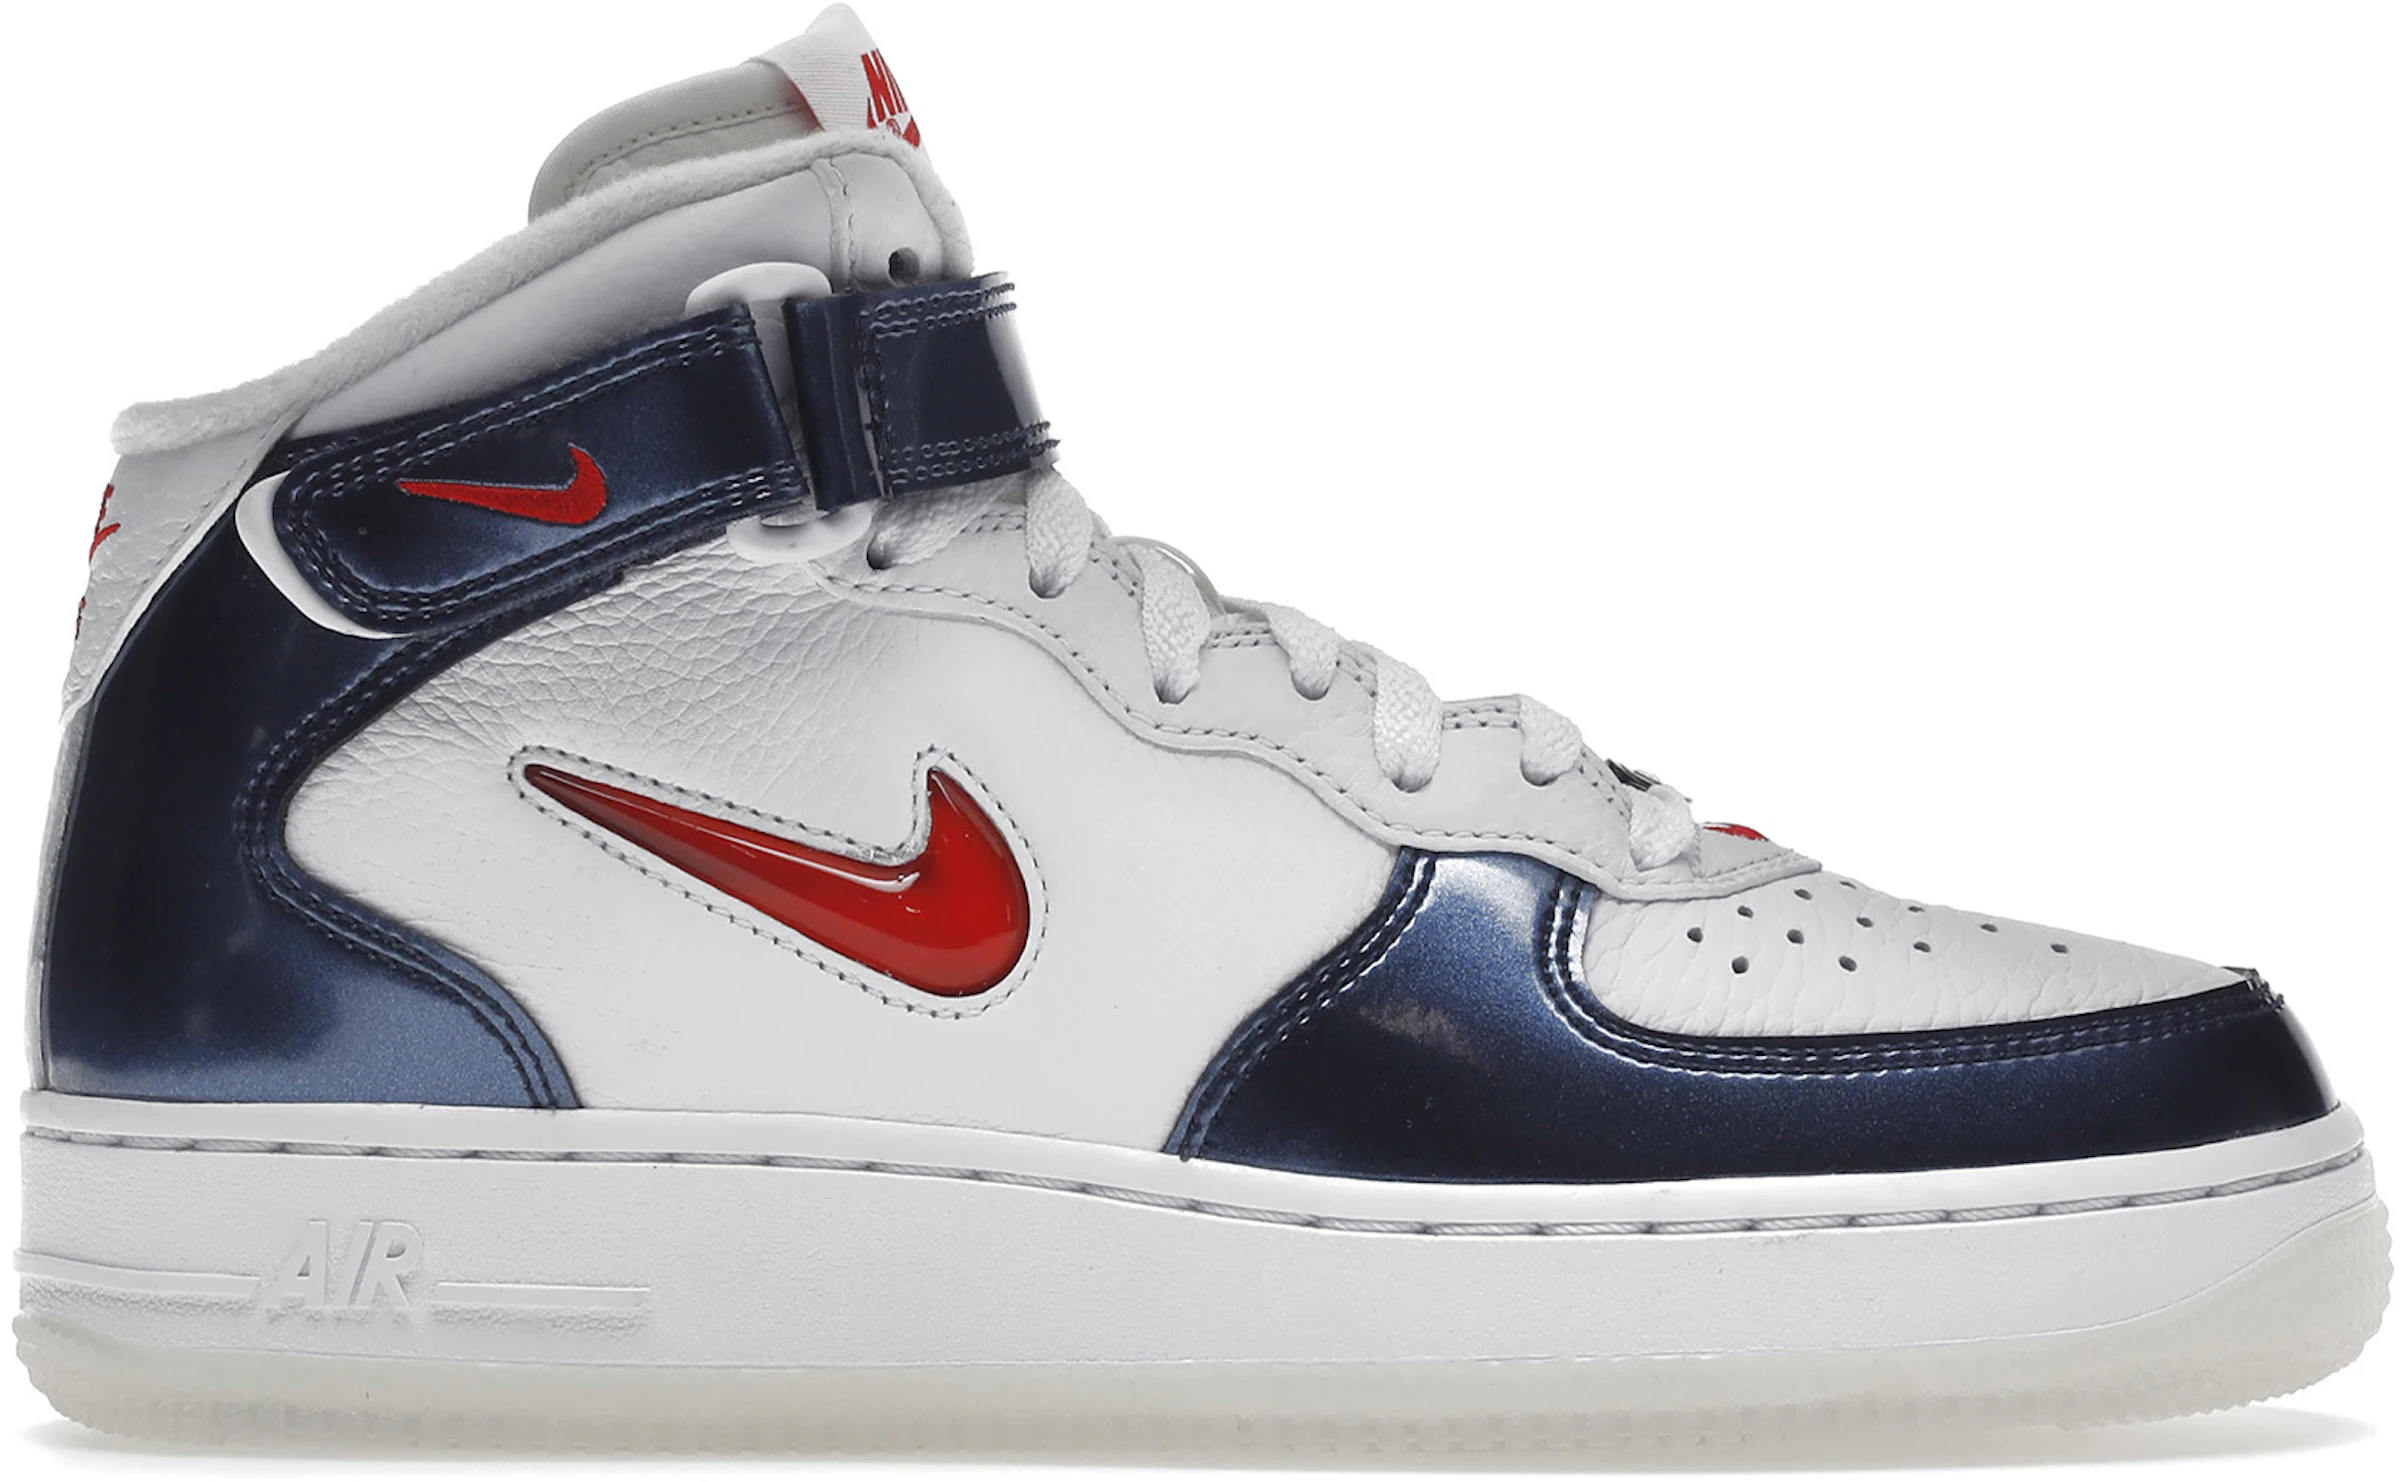 puerta consenso visión Nike Air Force 1 Mid QS Independence Day - DH5623-101 - ES